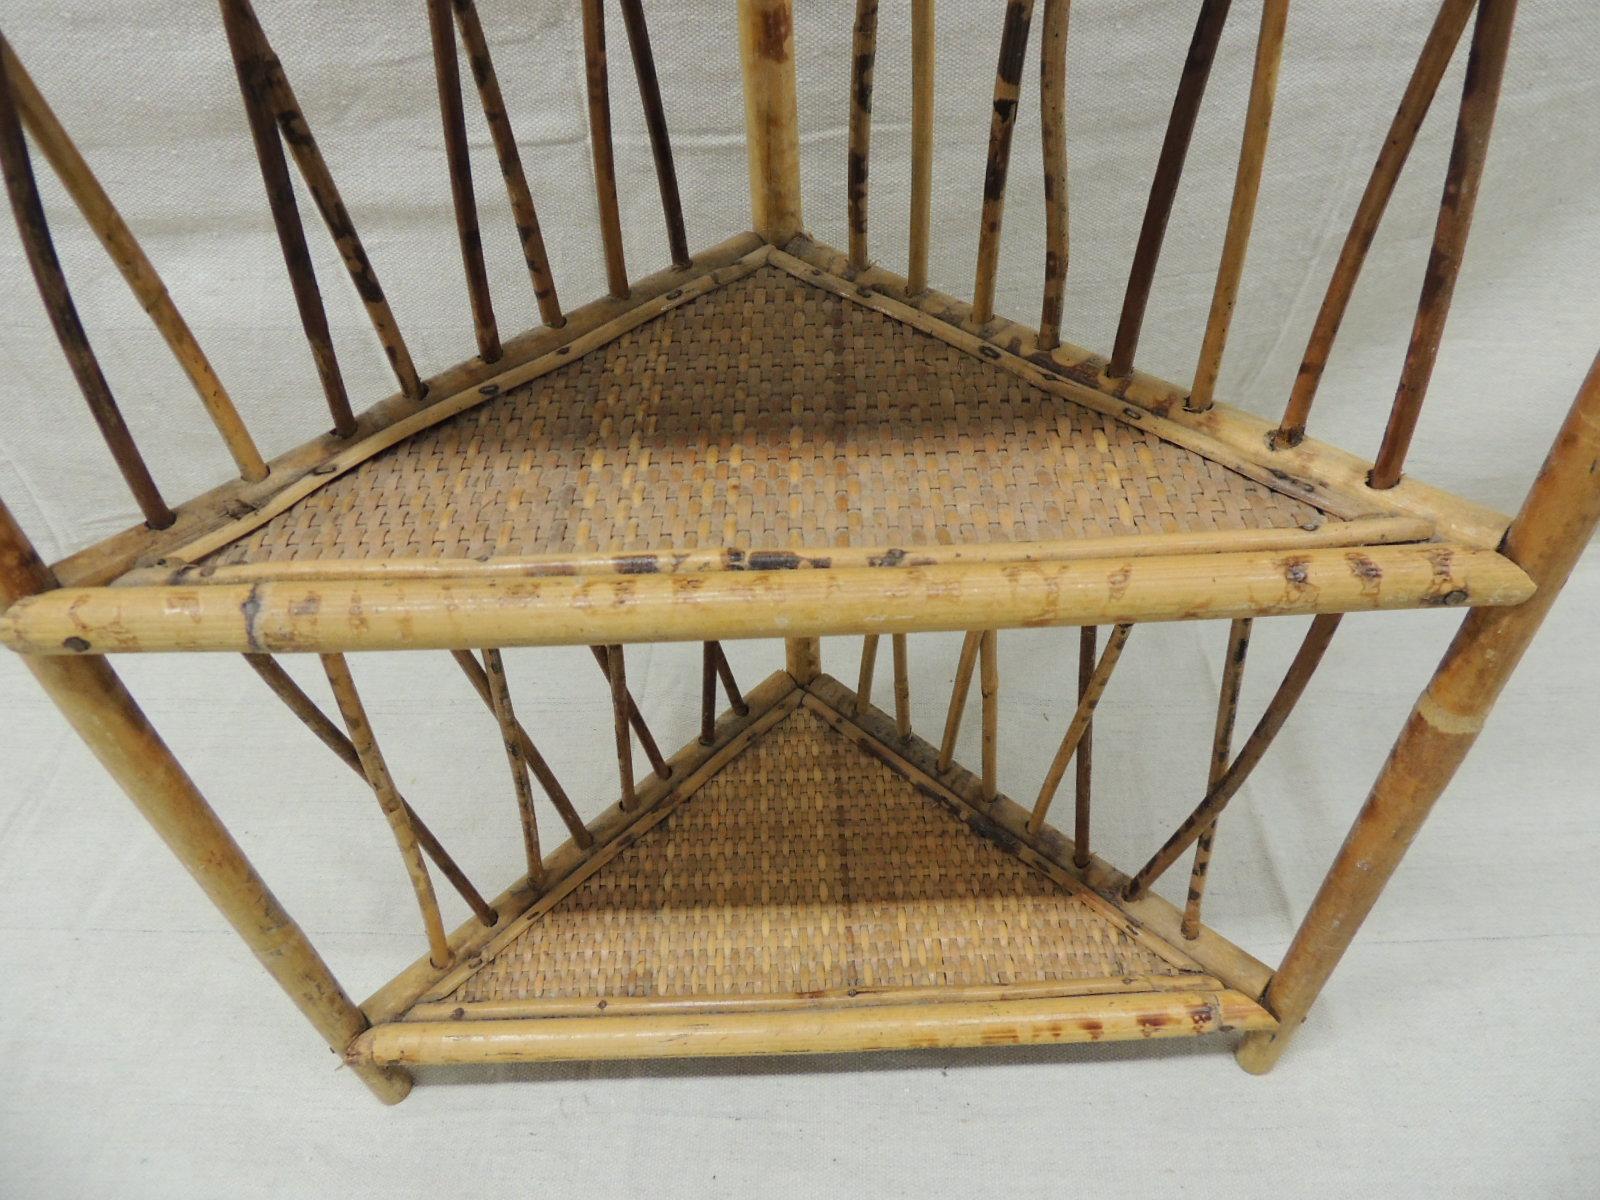 Hand-Crafted Vintage 3 Tiers Wall Shelf in Tortoiseshell Bamboo and Rattan with Hanging Hooks